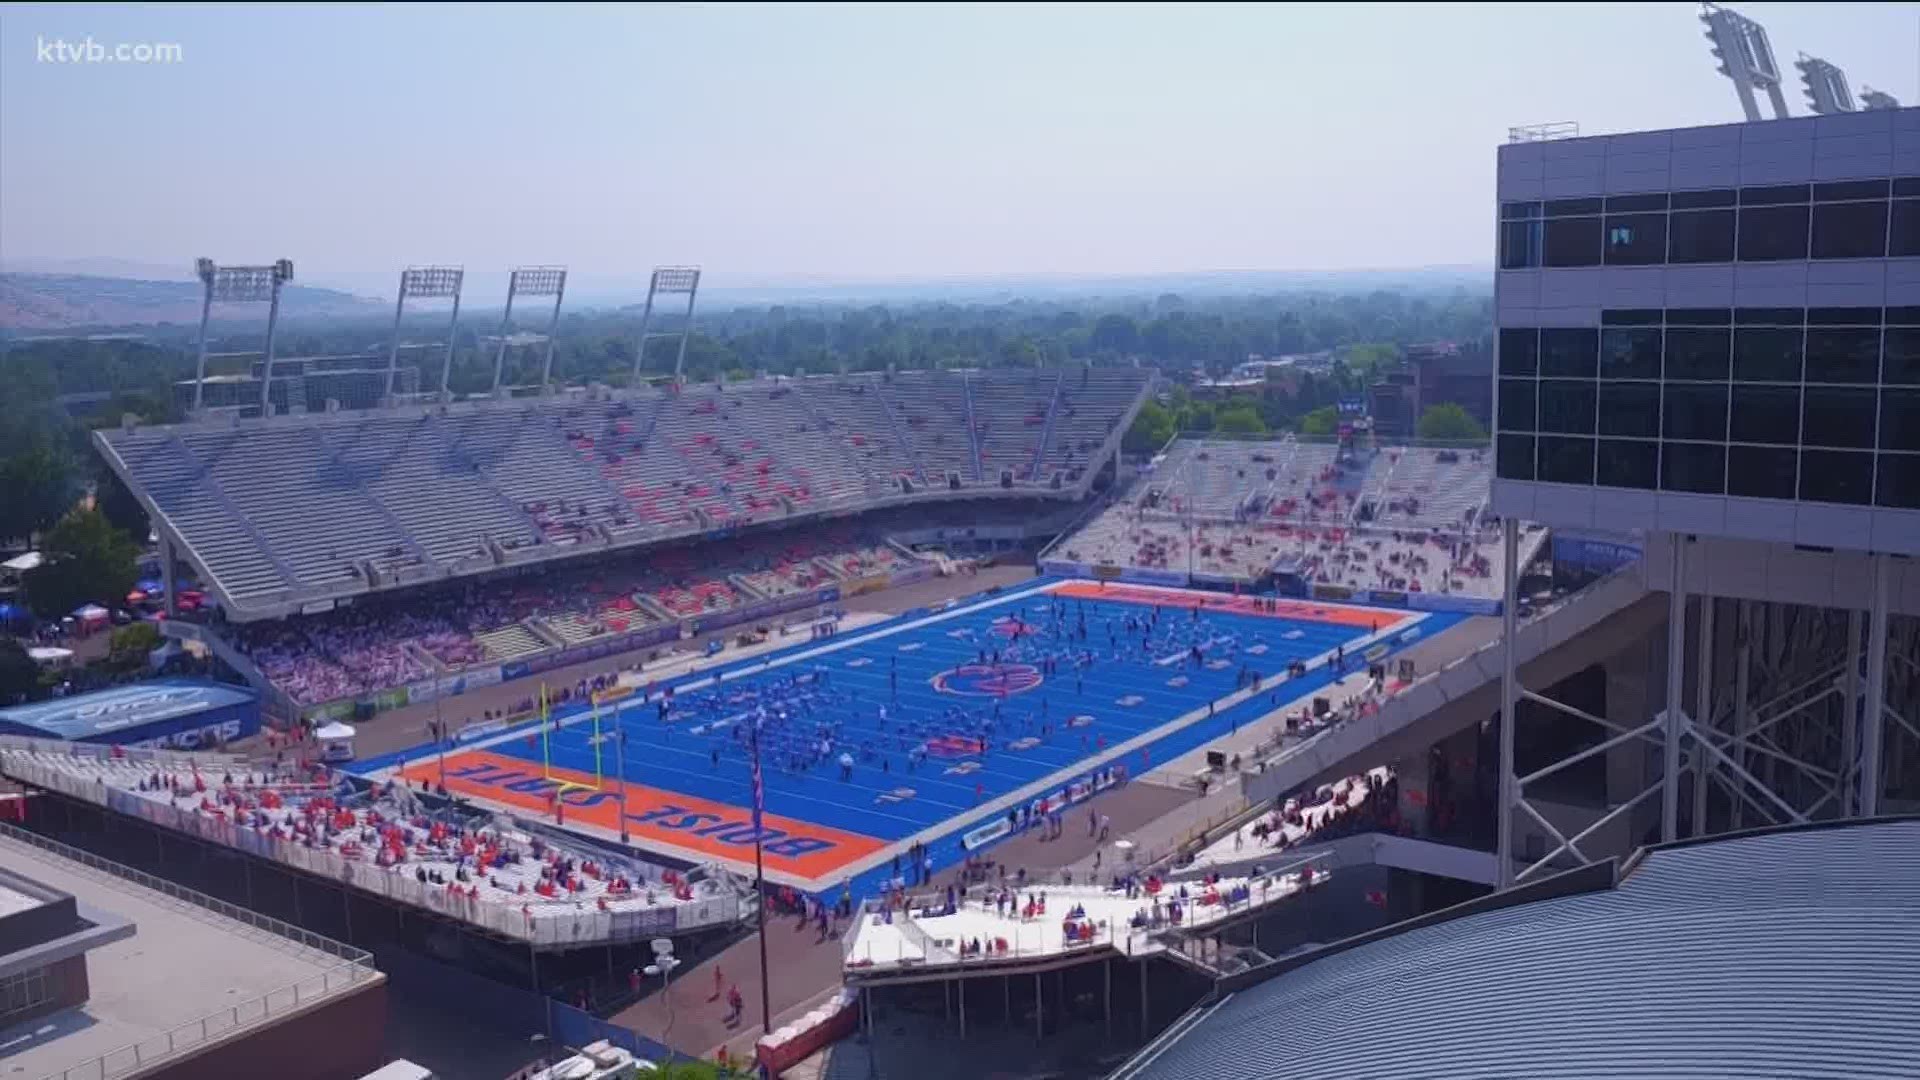 Dickey will speak on the Blue Turf at 2 p.m. Tuesday.